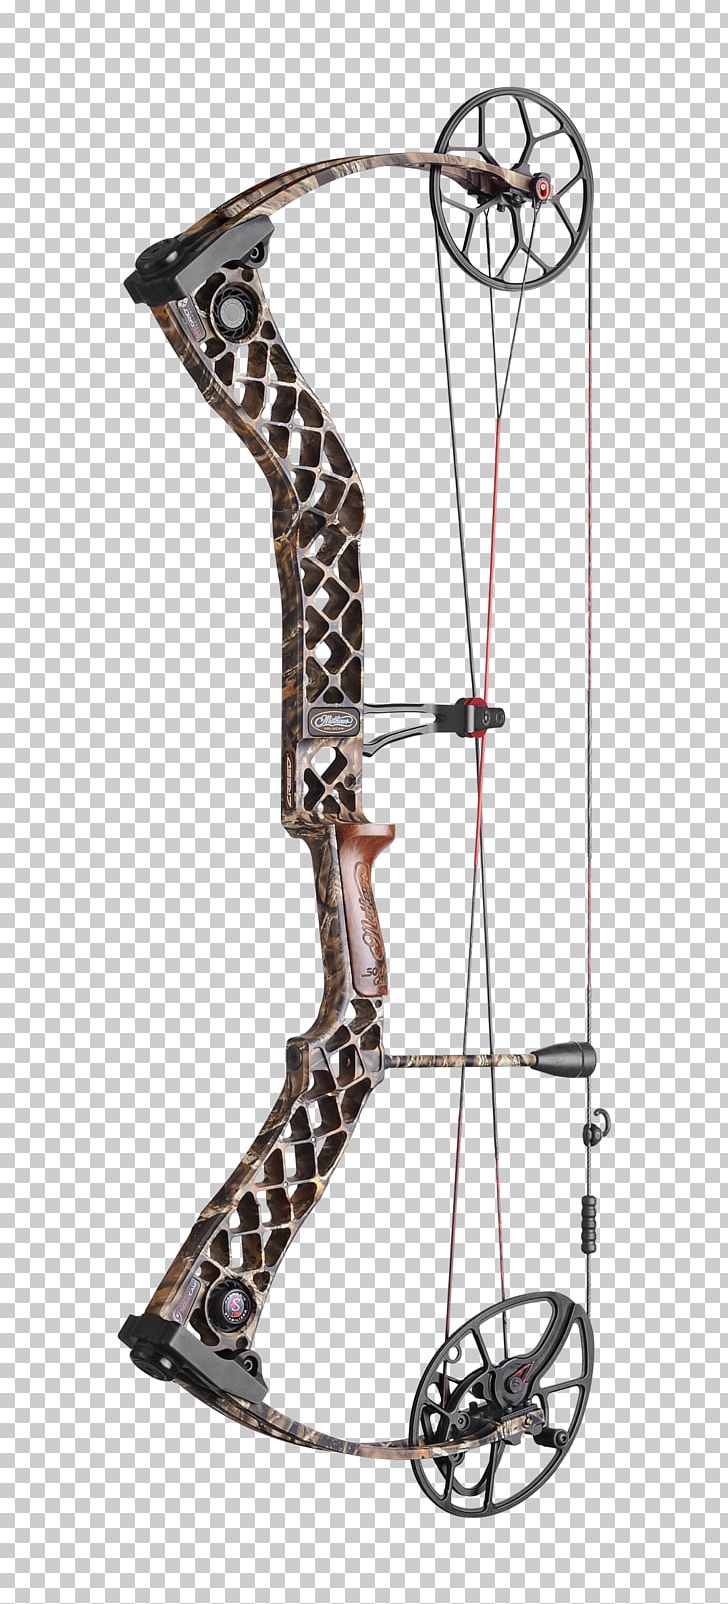 Mathews Archery PNG, Clipart, Archery, Bow, Bow And Arrow, Bowhunting, Bowstring Free PNG Download